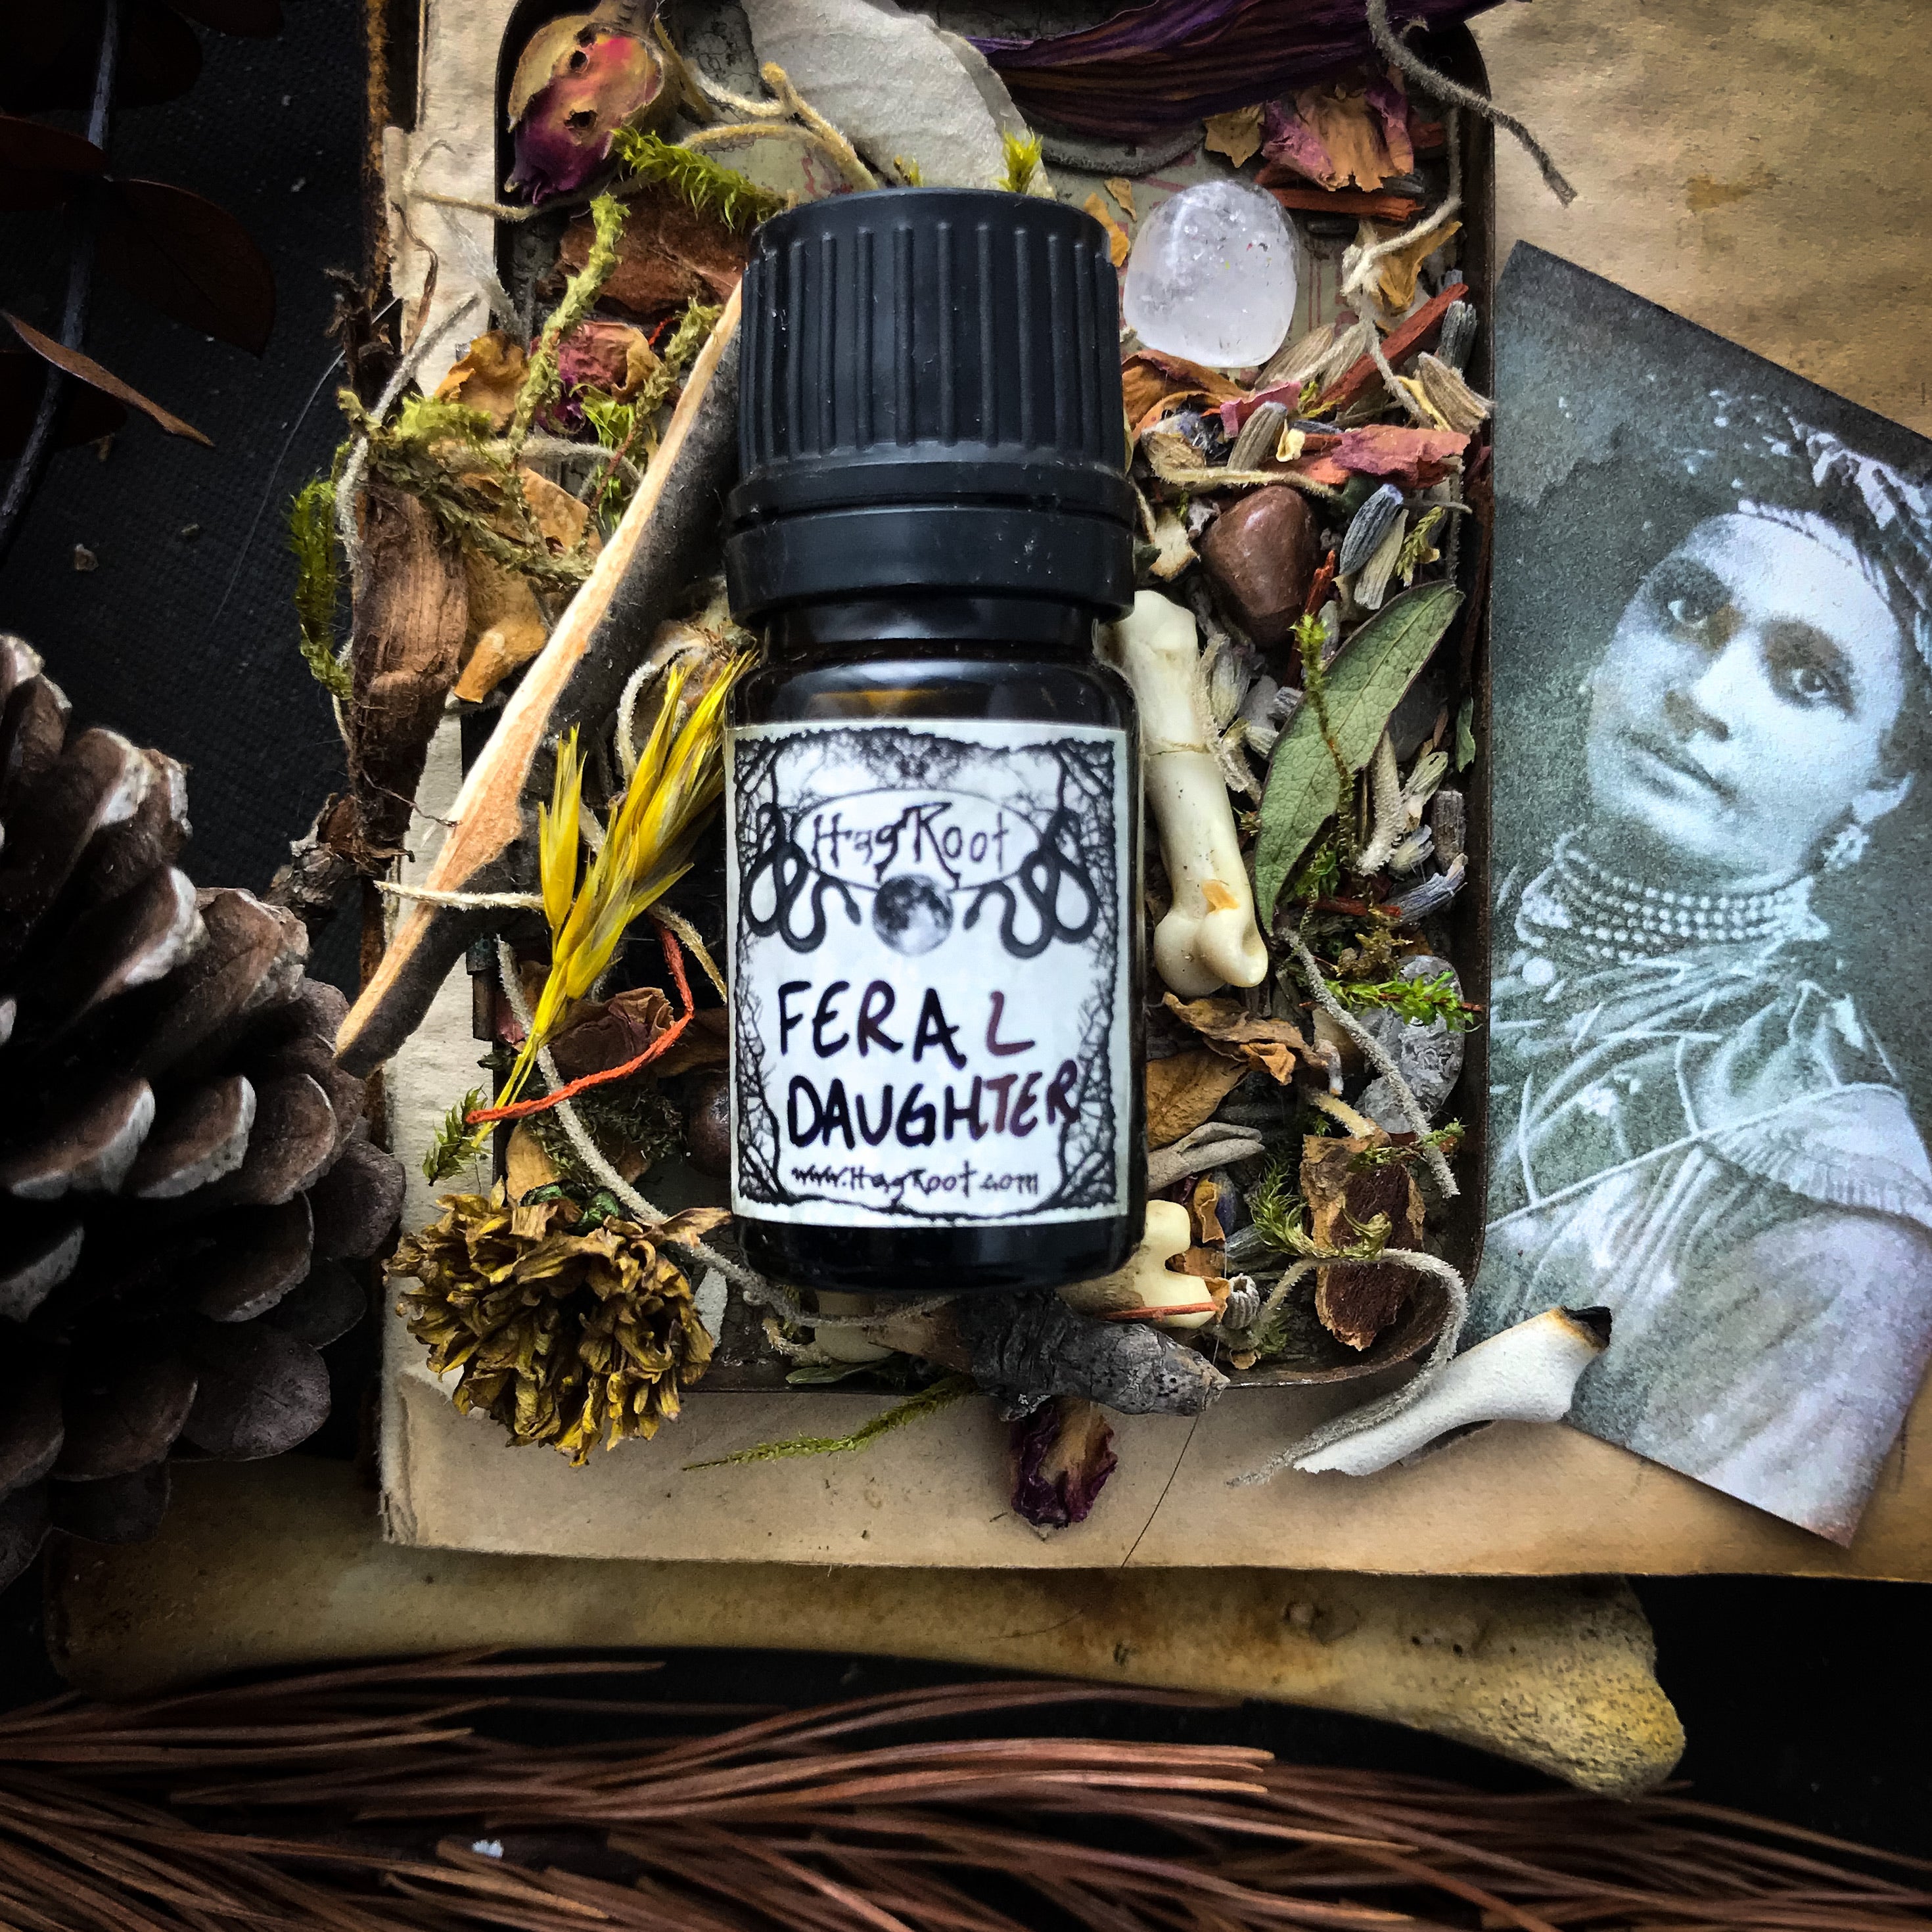 FERAL DAUGHTER-(Jasmine, Pink Peppercorn, Pine, Sandalwood, Violet, Musk, Amber, Patchouli)-Perfume, Cologne, Anointing, Ritual Oil